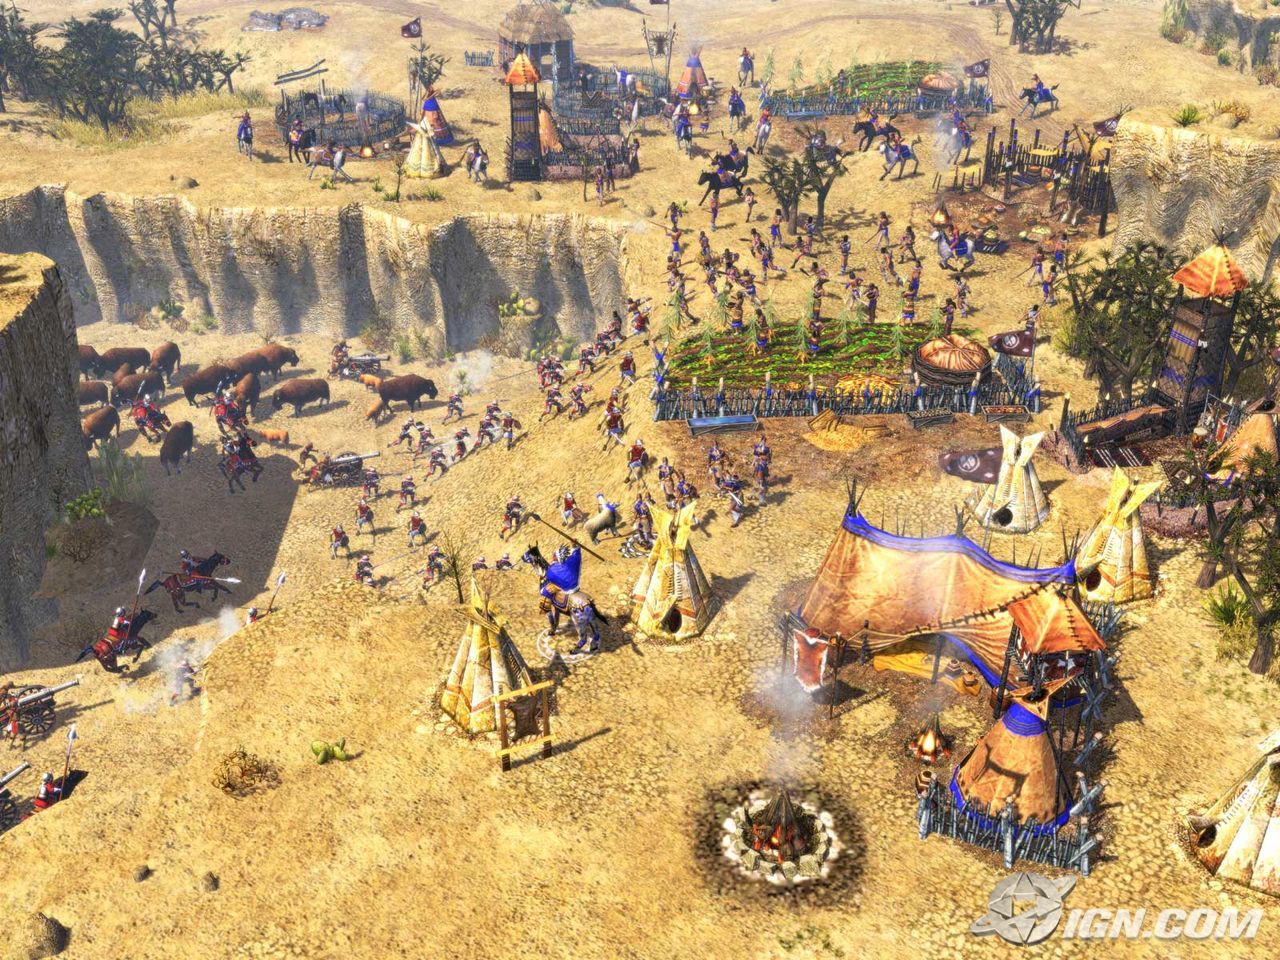 free age of empires 3 full game download for mac